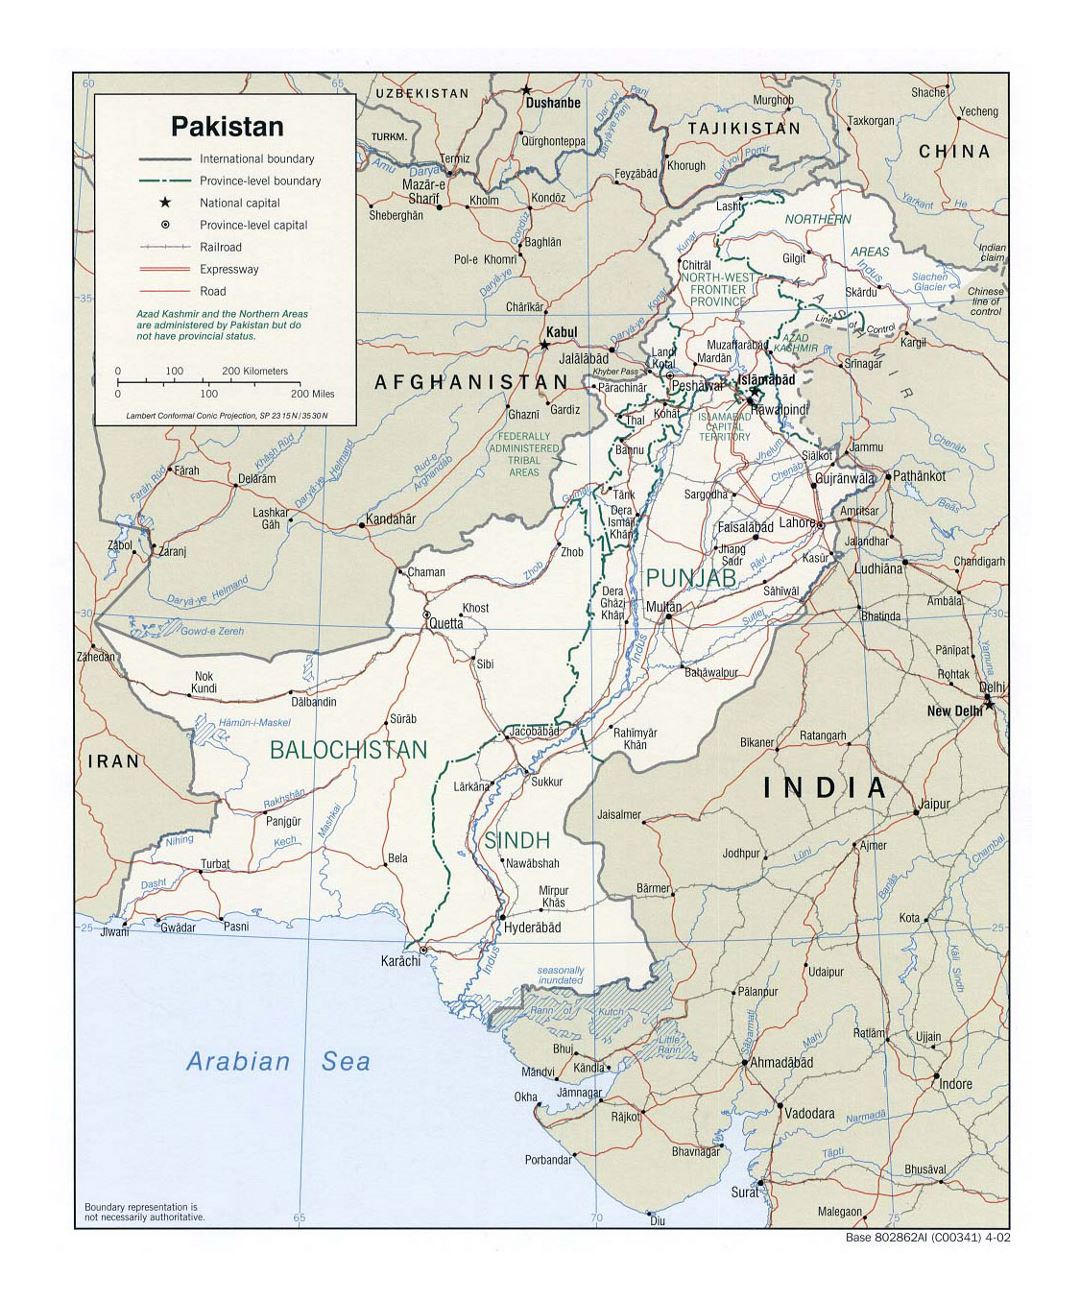 Detailed political and administrative map of Pakistan with roads, railroads and major cities - 2002